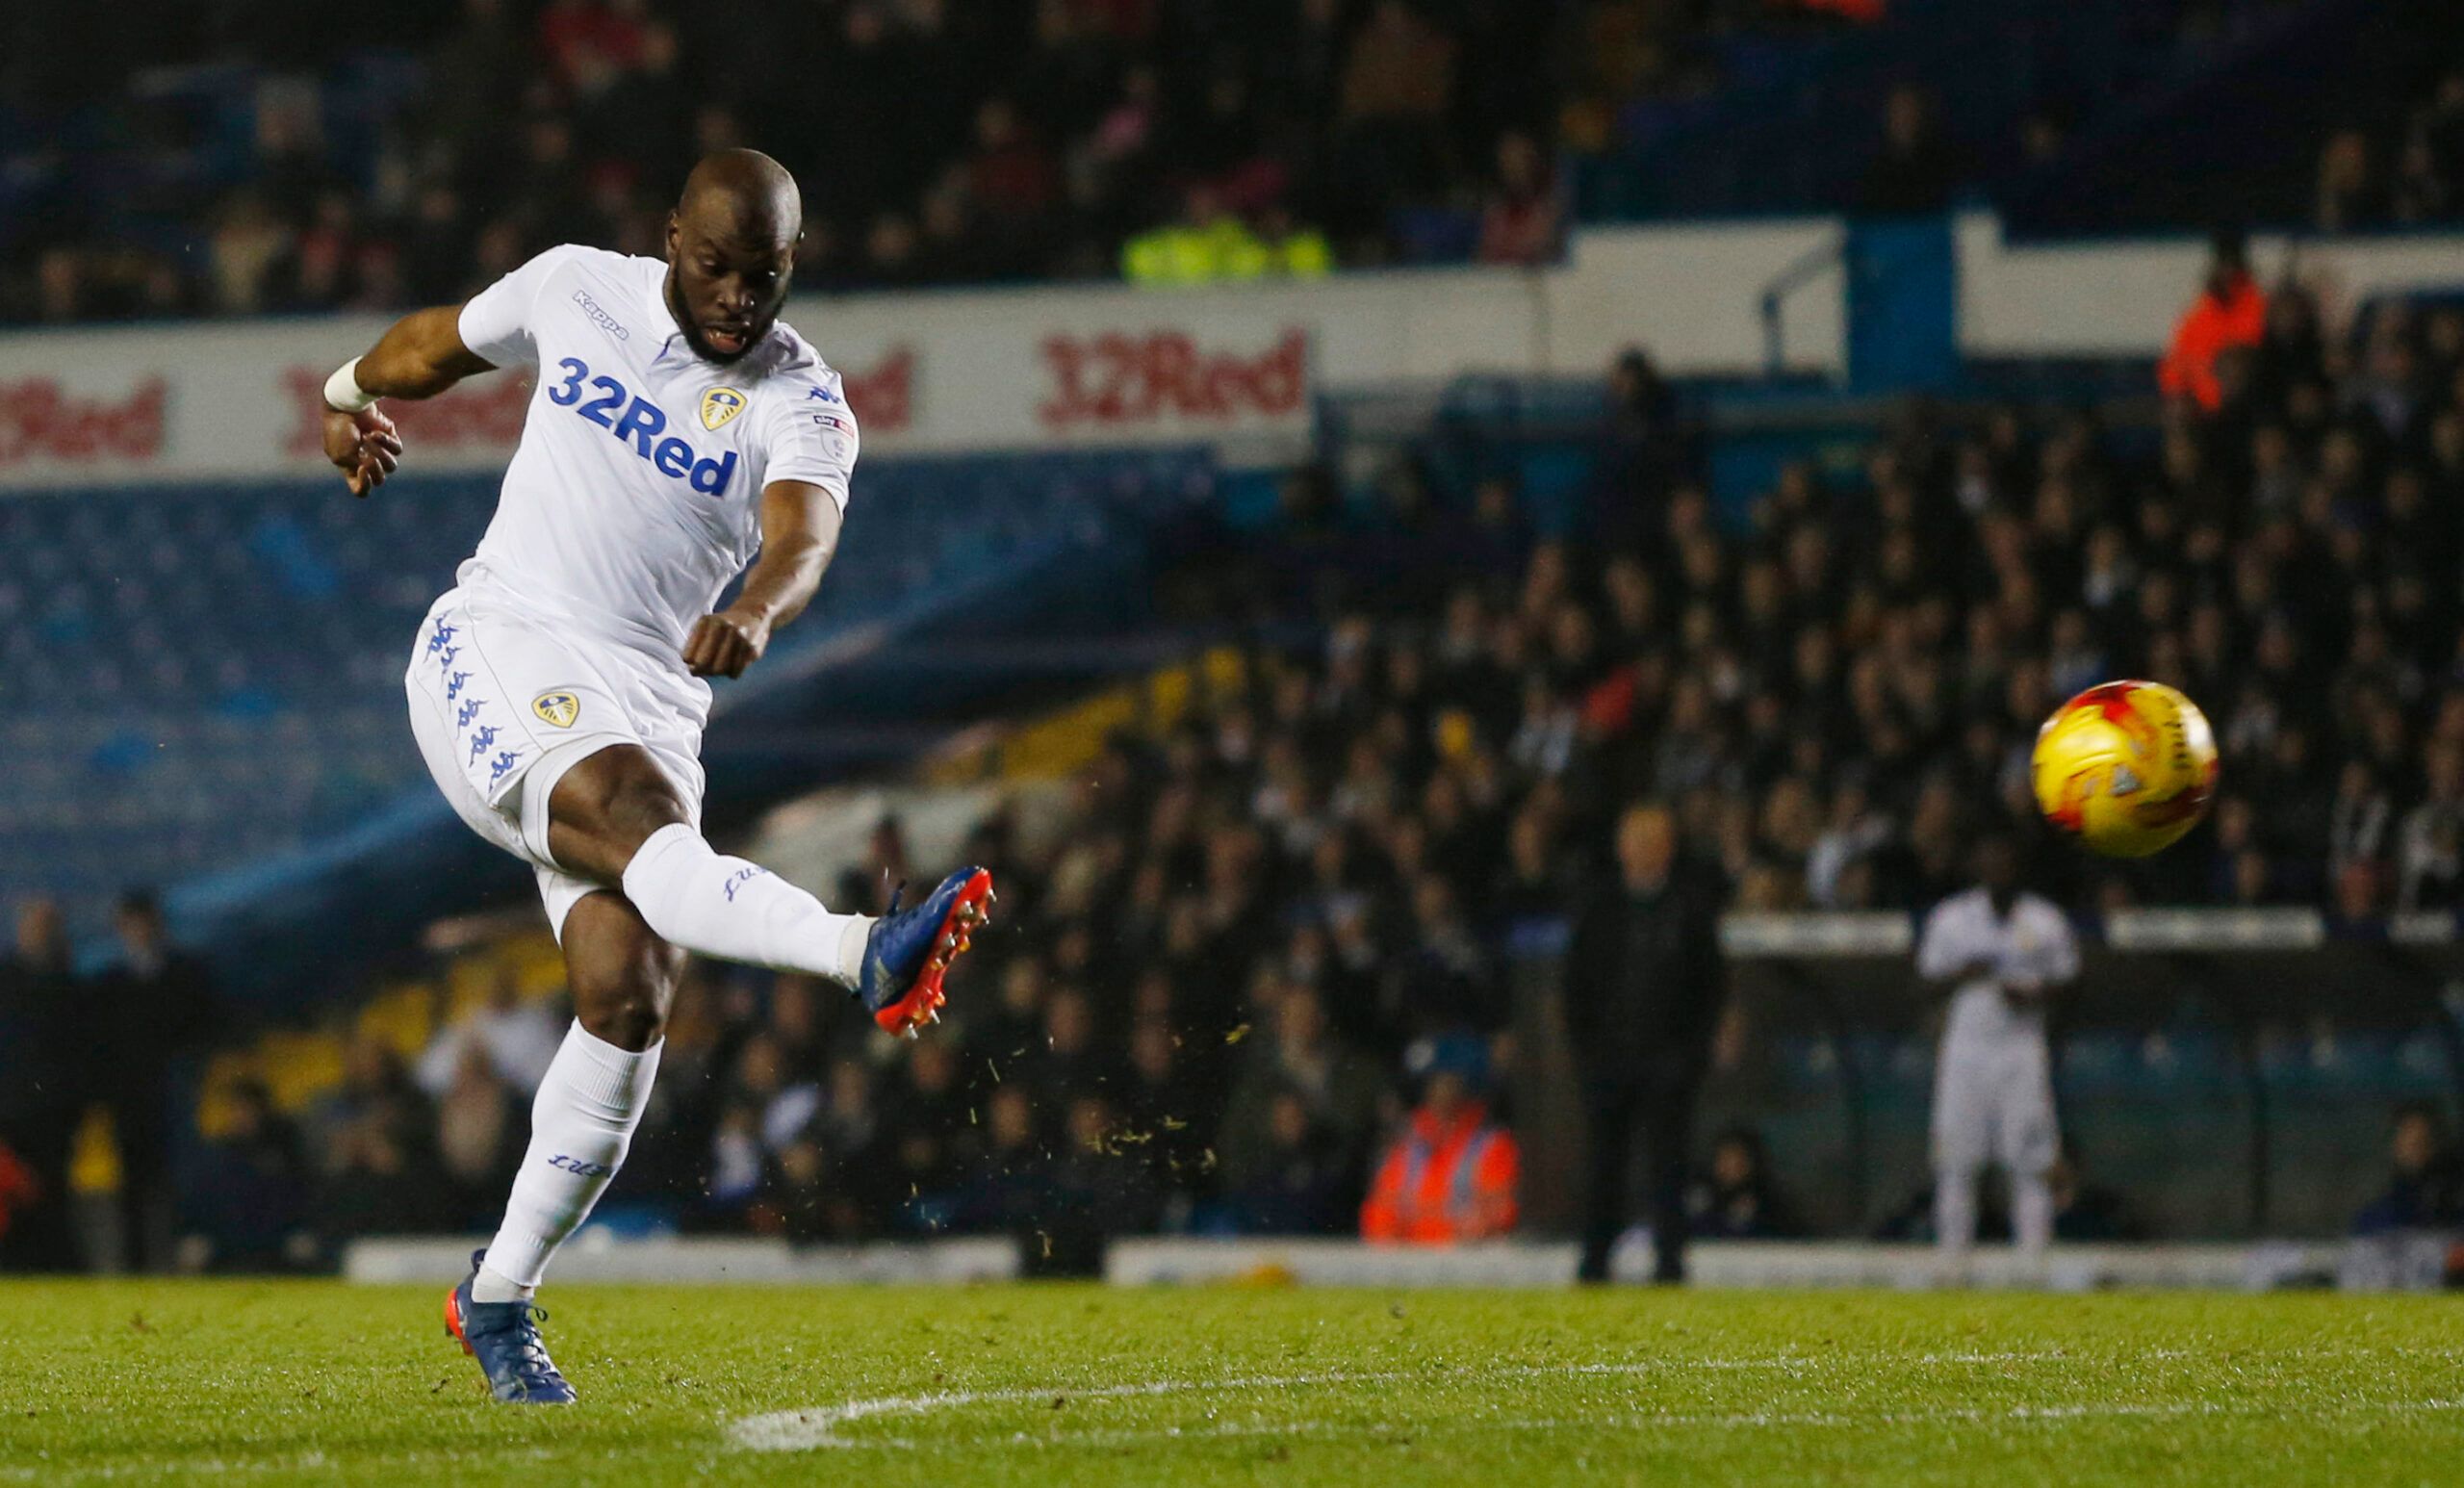 Britain Football Soccer - Leeds United v Nottingham Forest - Sky Bet Championship - Elland Road - 25/1/17 Souleymane Doukara scores Leeds United's second goal Mandatory Credit: Action Images / Ed Sykes Livepic EDITORIAL USE ONLY. No use with unauthorized audio, video, data, fixture lists, club/league logos or 